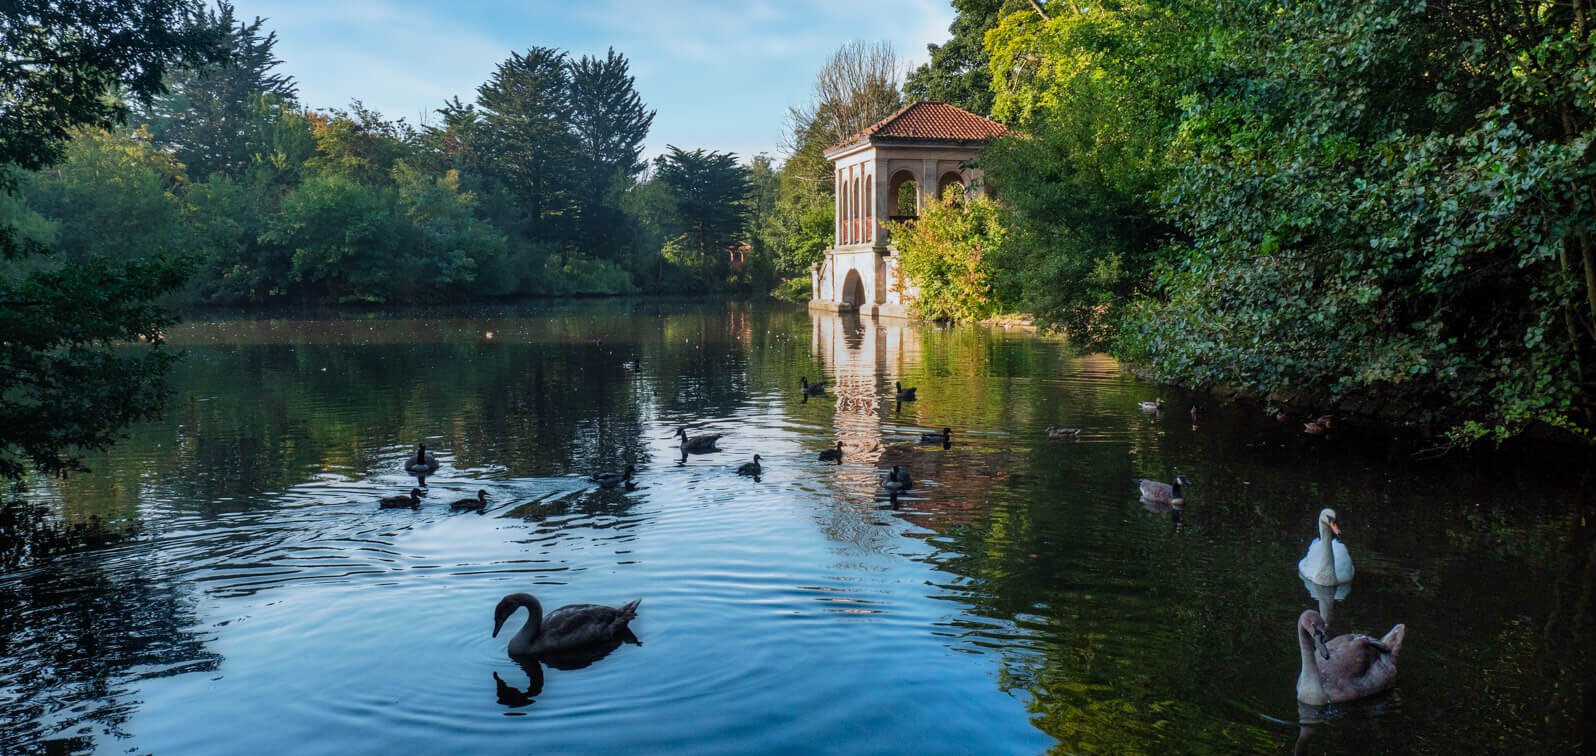 The Boat House with swans swimming in the lake in Birkenhead Park